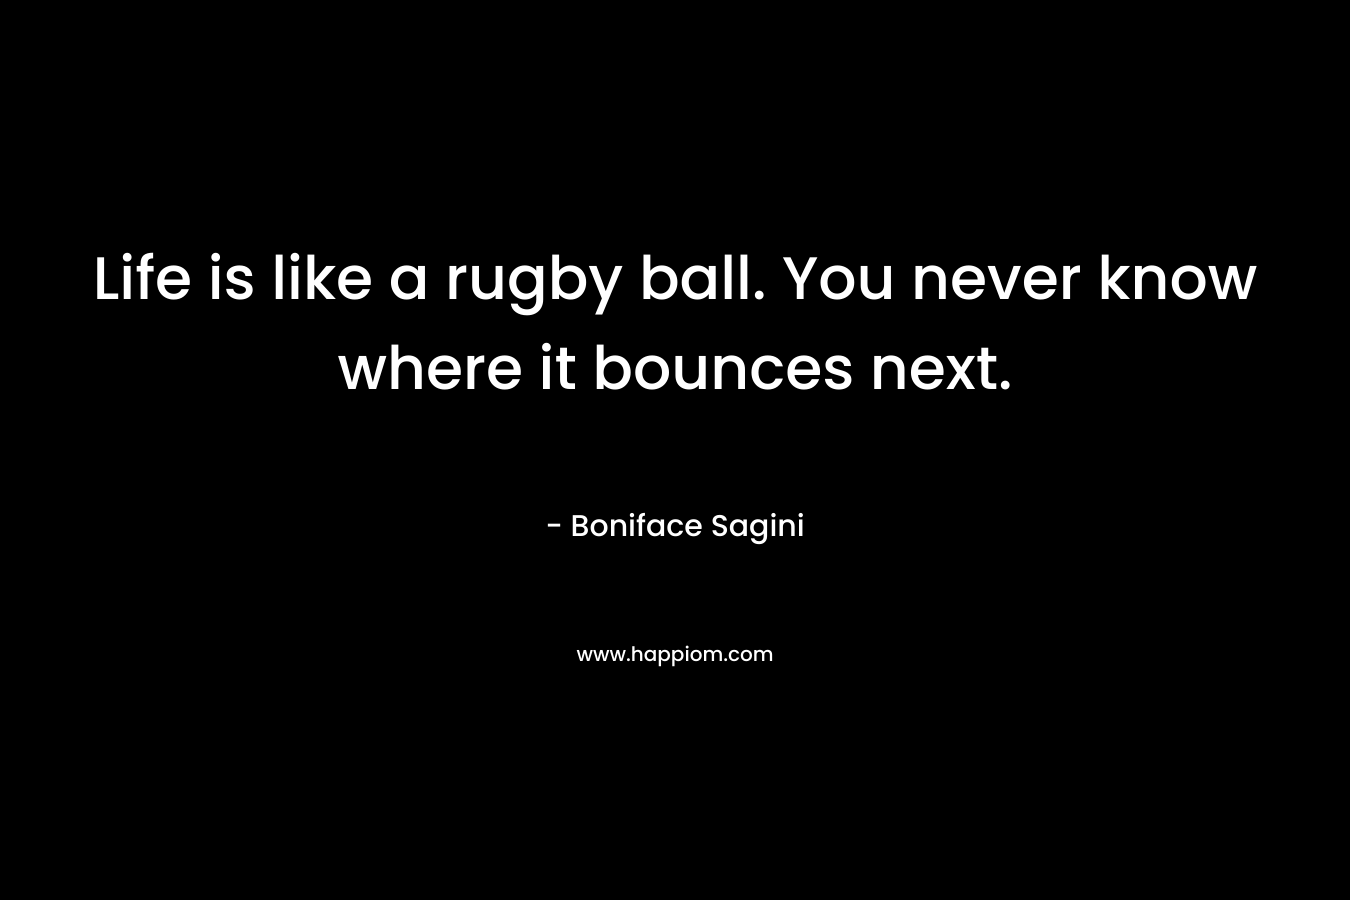 Life is like a rugby ball. You never know where it bounces next.